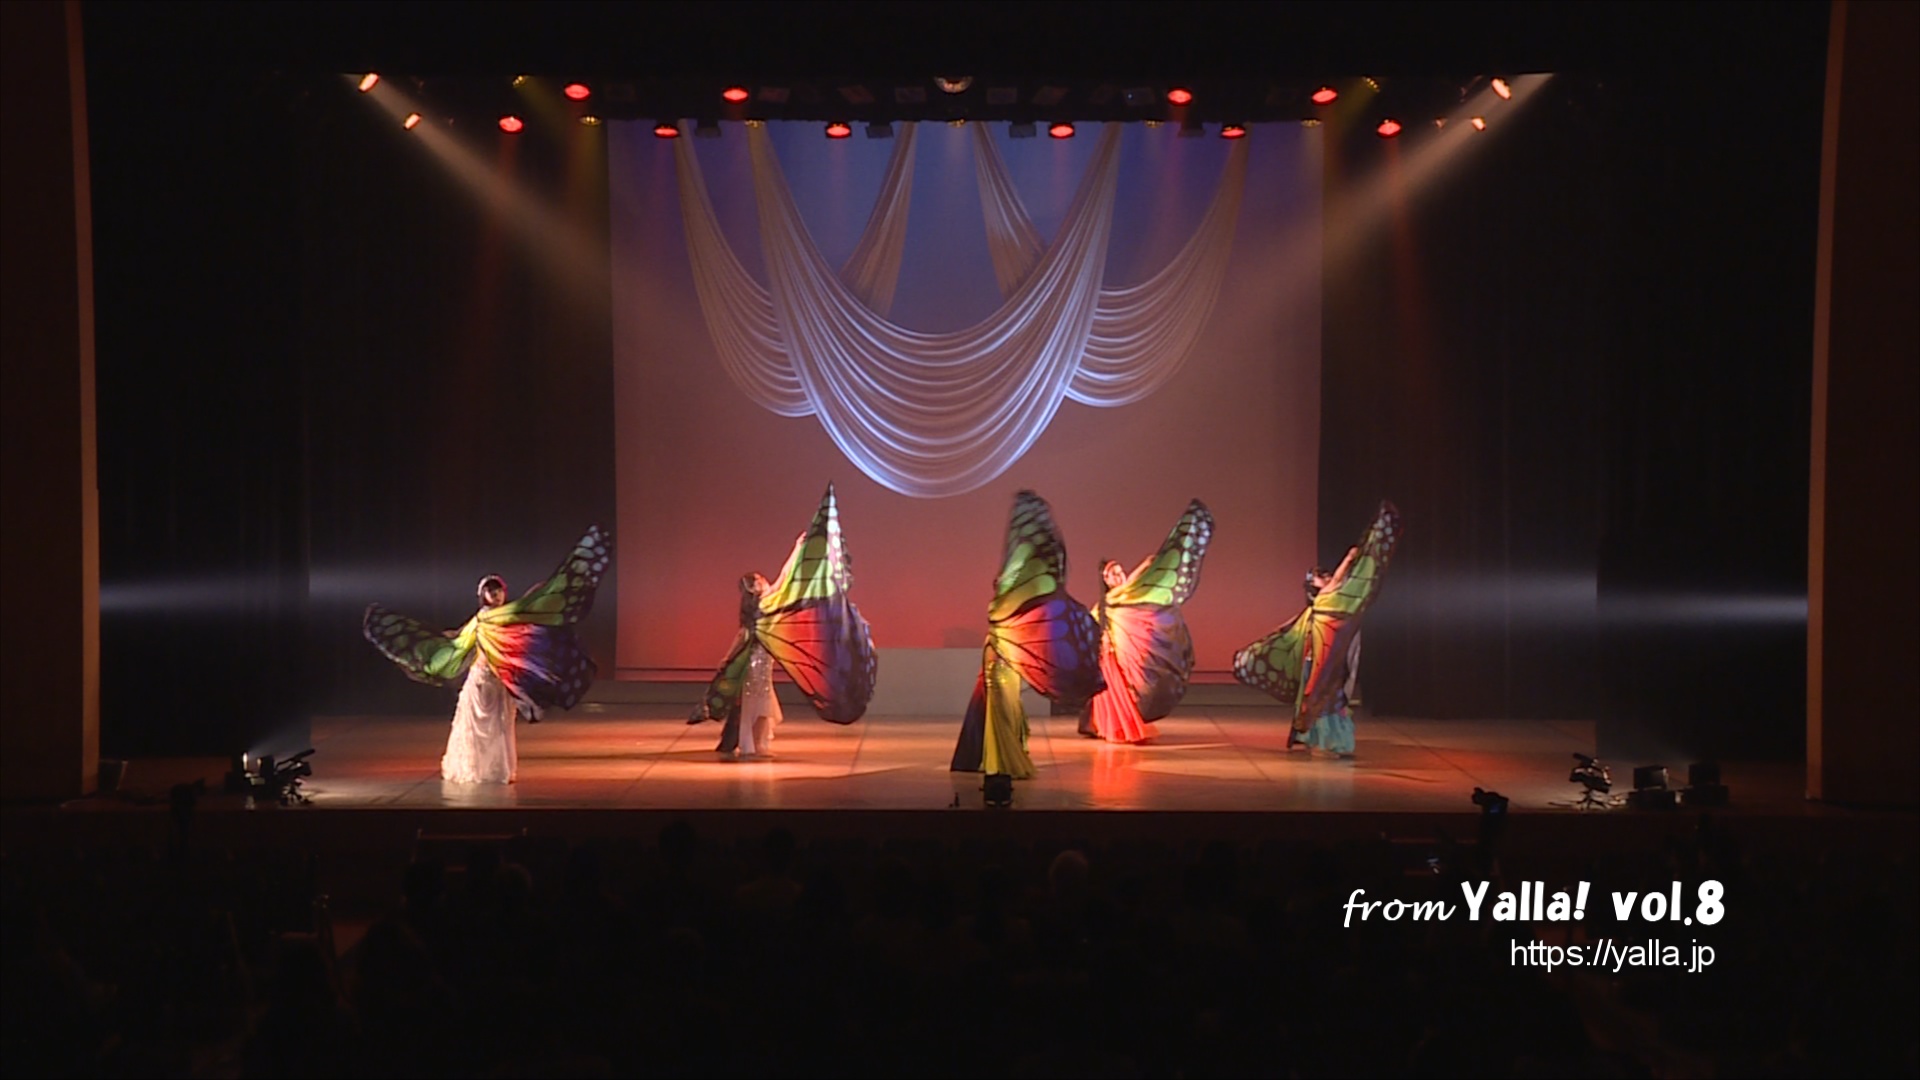 035-performancie-image-of-bellydance-for-yalla-8th-live-stage